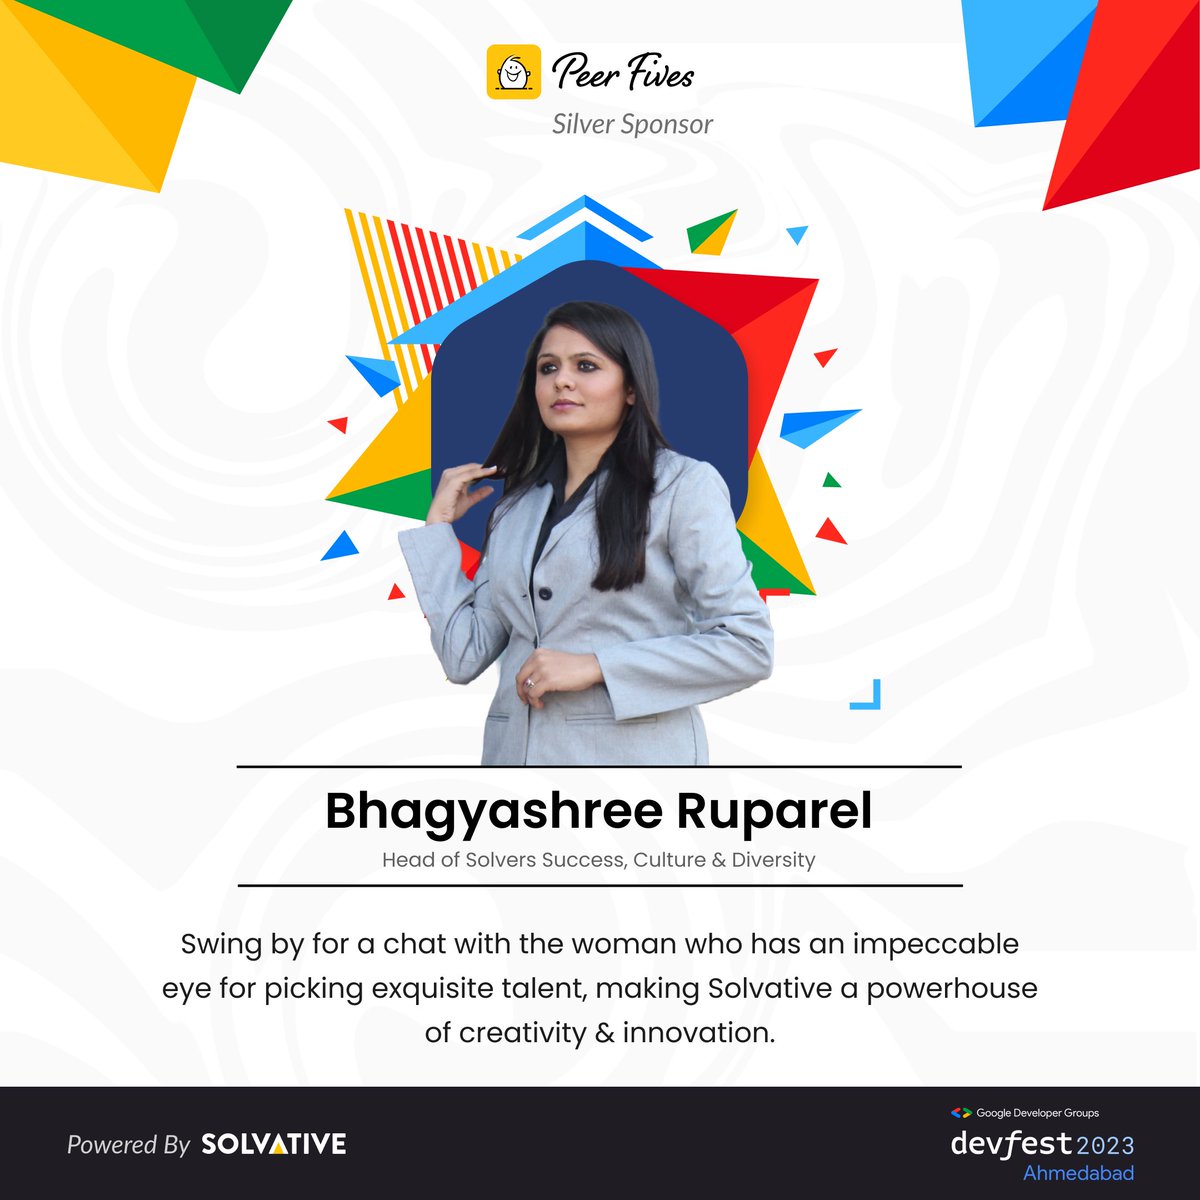 Meet Bhagyashree Ruparel, Head of Solvers Success at Solvative, at #devfest2023 in Ahmedabad! Discover how we're shaping a talent powerhouse and fostering diversity in tech. #DevFestAhm #silversponsor #GDG #TechCommunity #DevFest2023 #Gratitude